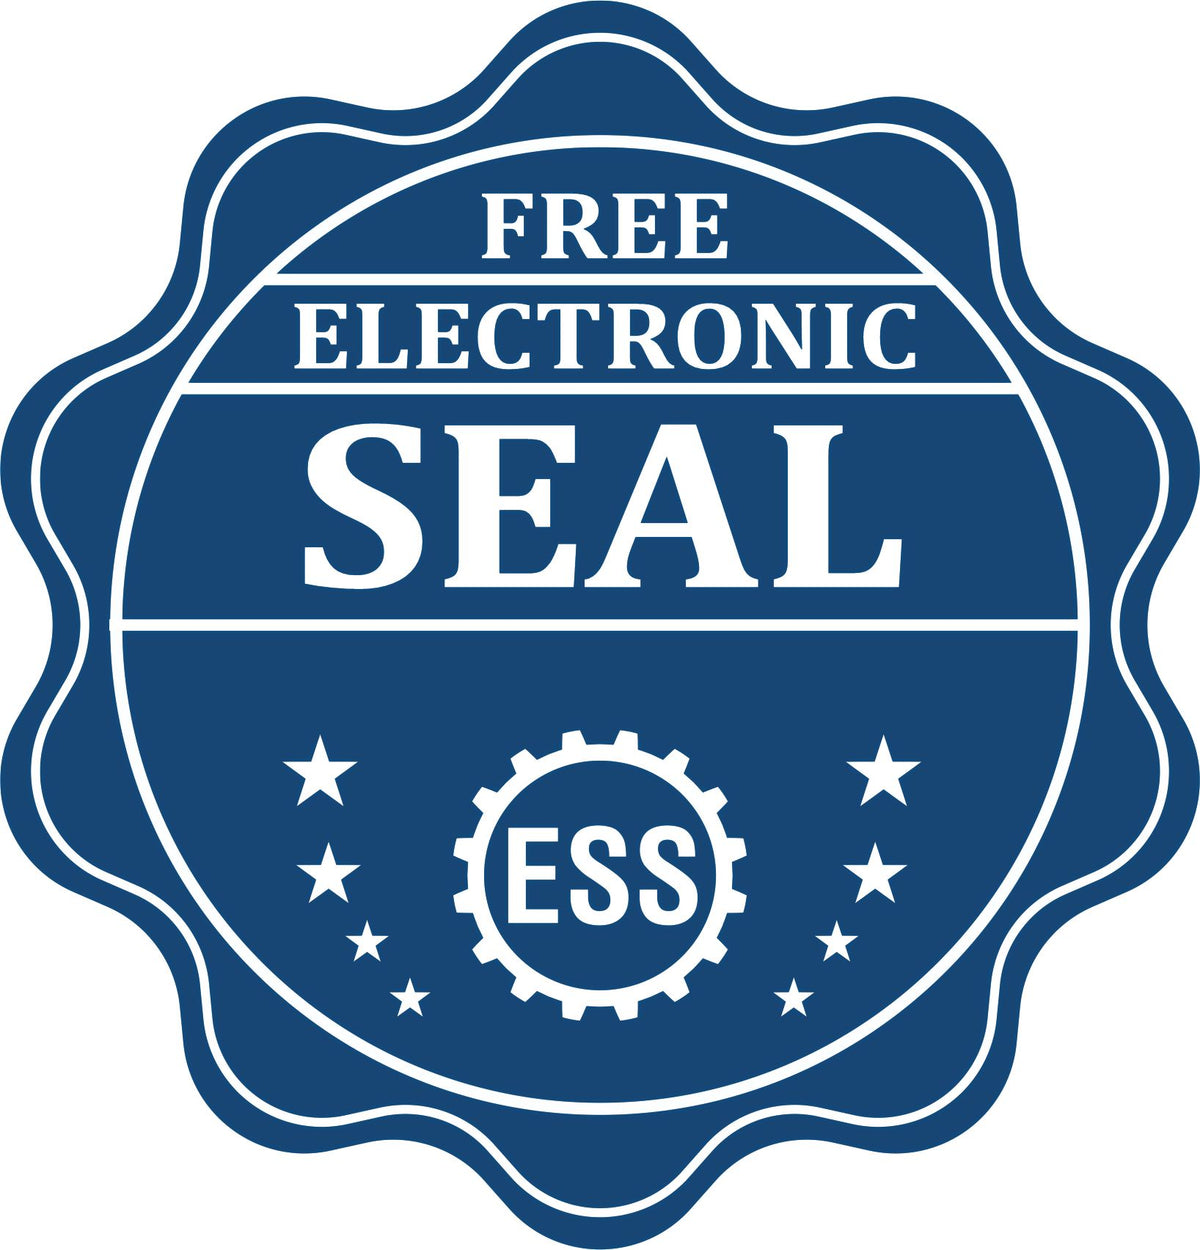 A badge showing a free electronic seal for the Heavy Duty Cast Iron Nevada Architect Embosser with stars and the ESS gear on the emblem.